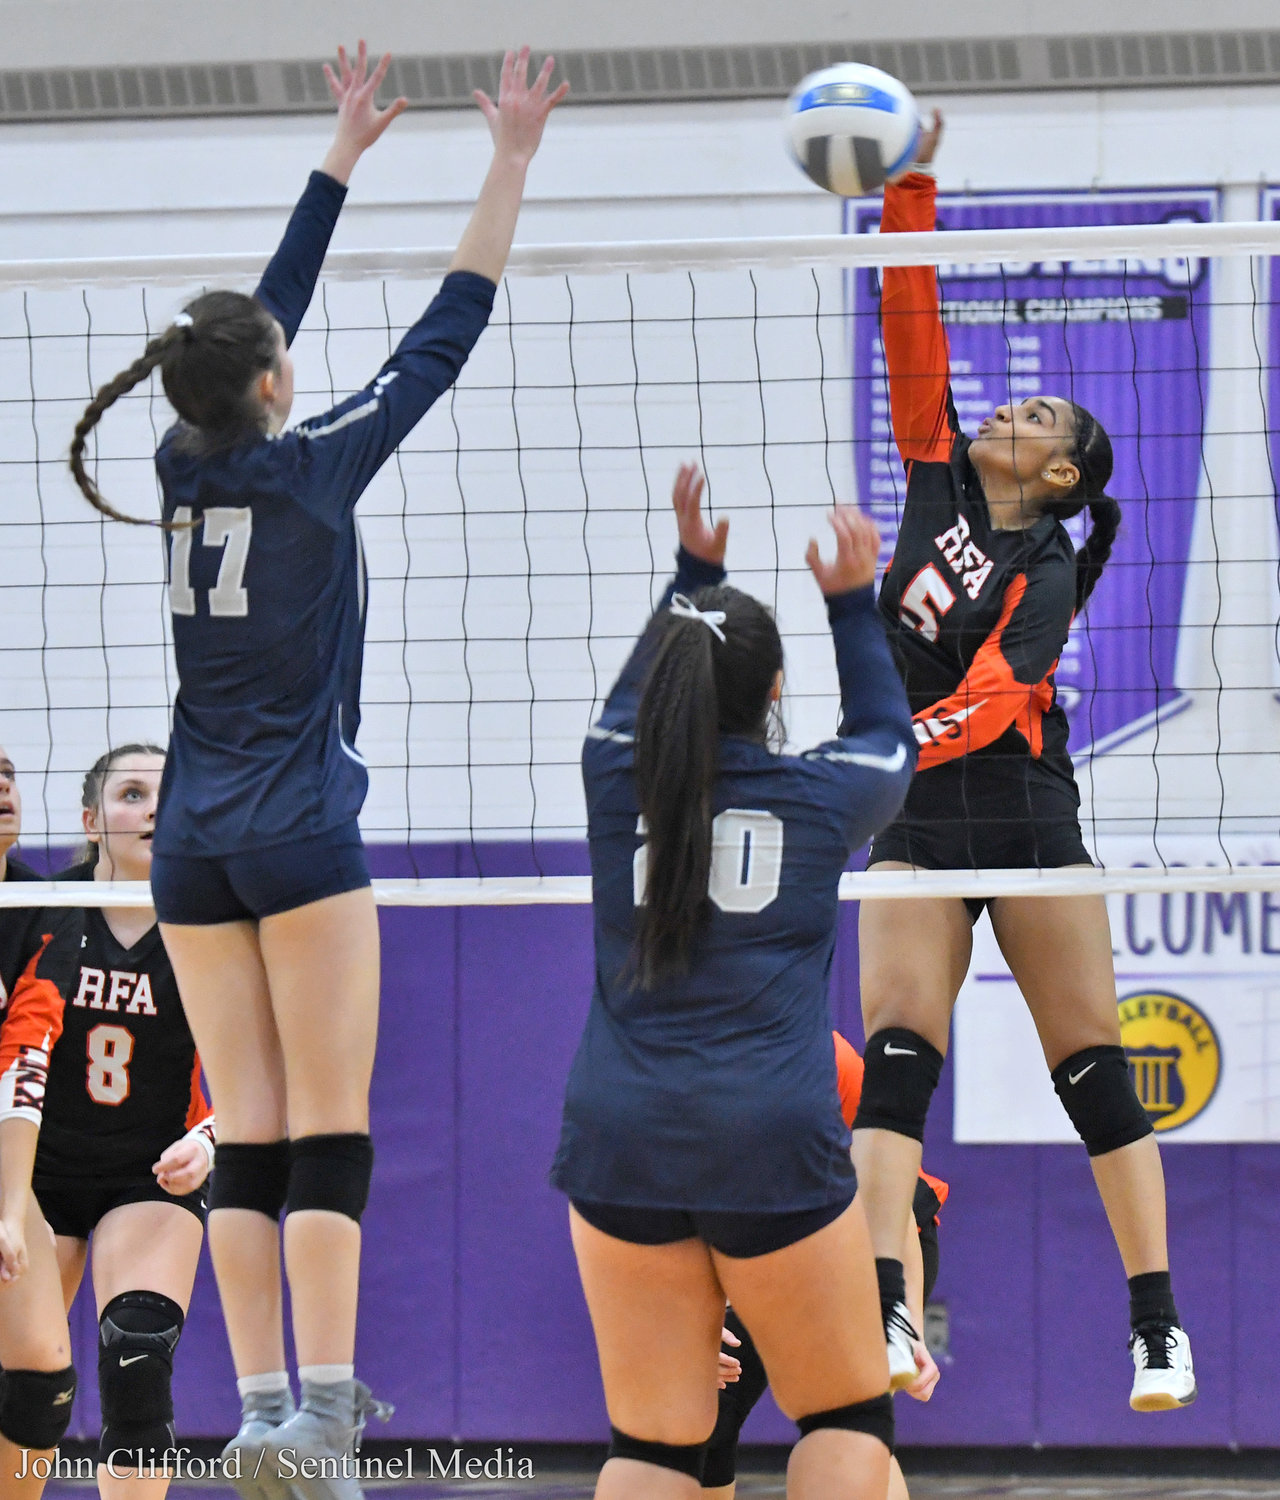 Rome Free Academy #5 Kassity Cruz makes a kill in front of Whitesboro #17 Eva Quackenbush and #20 Kylee DeCarr Saturday afternoon in Watertown.